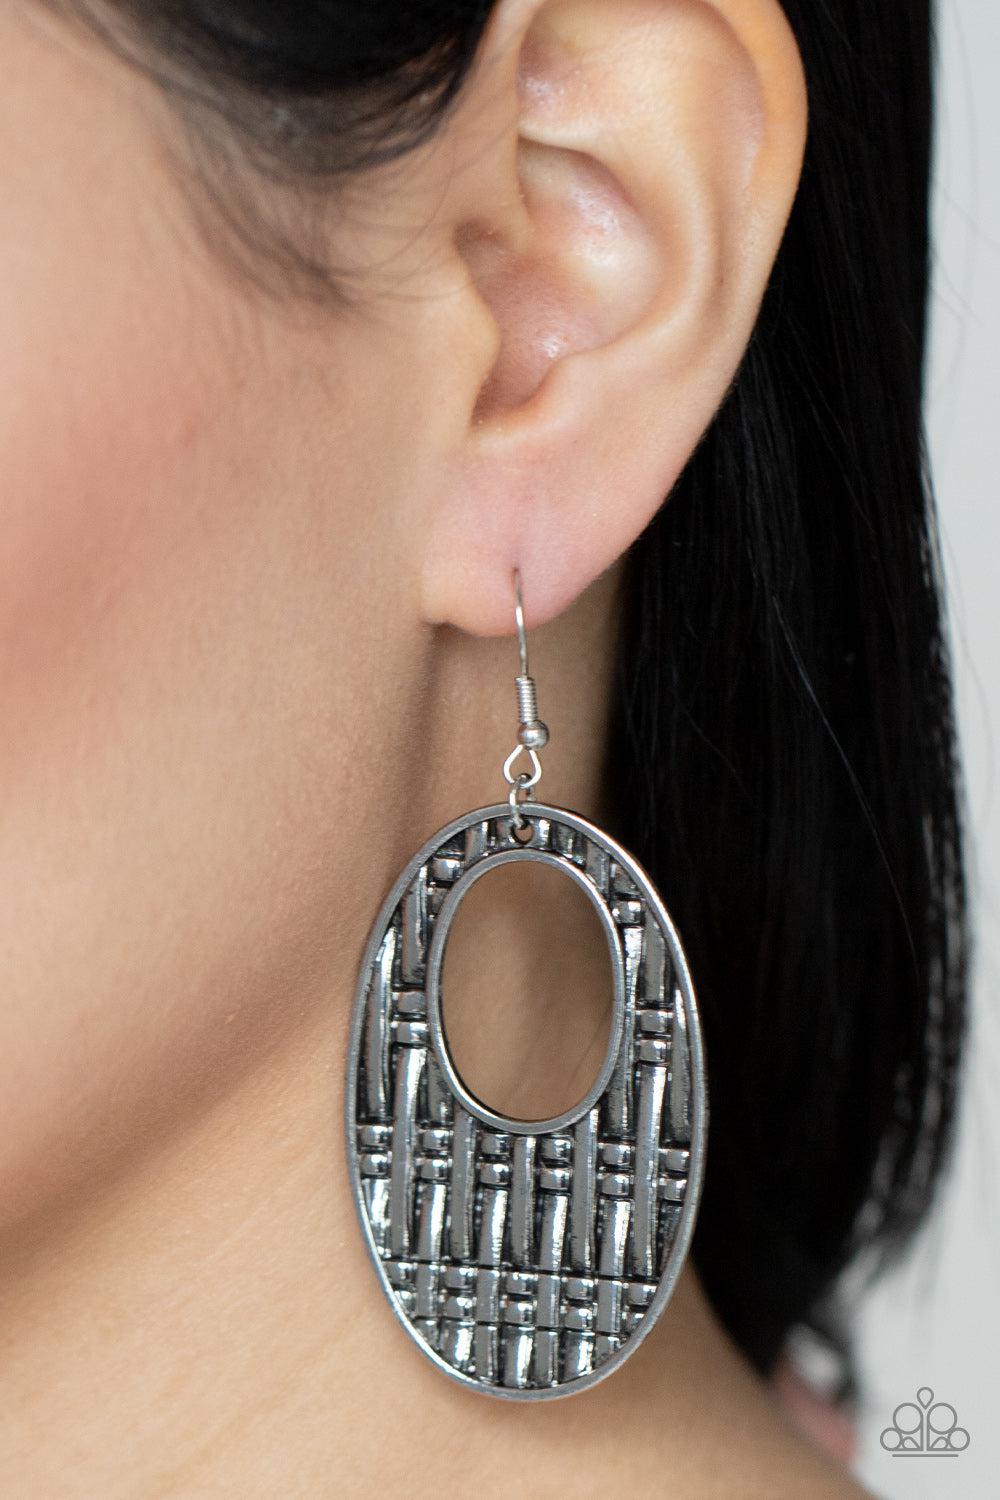 Engraved Edge Silver Earrings - Paparazzi Accessories-on model - CarasShop.com - $5 Jewelry by Cara Jewels